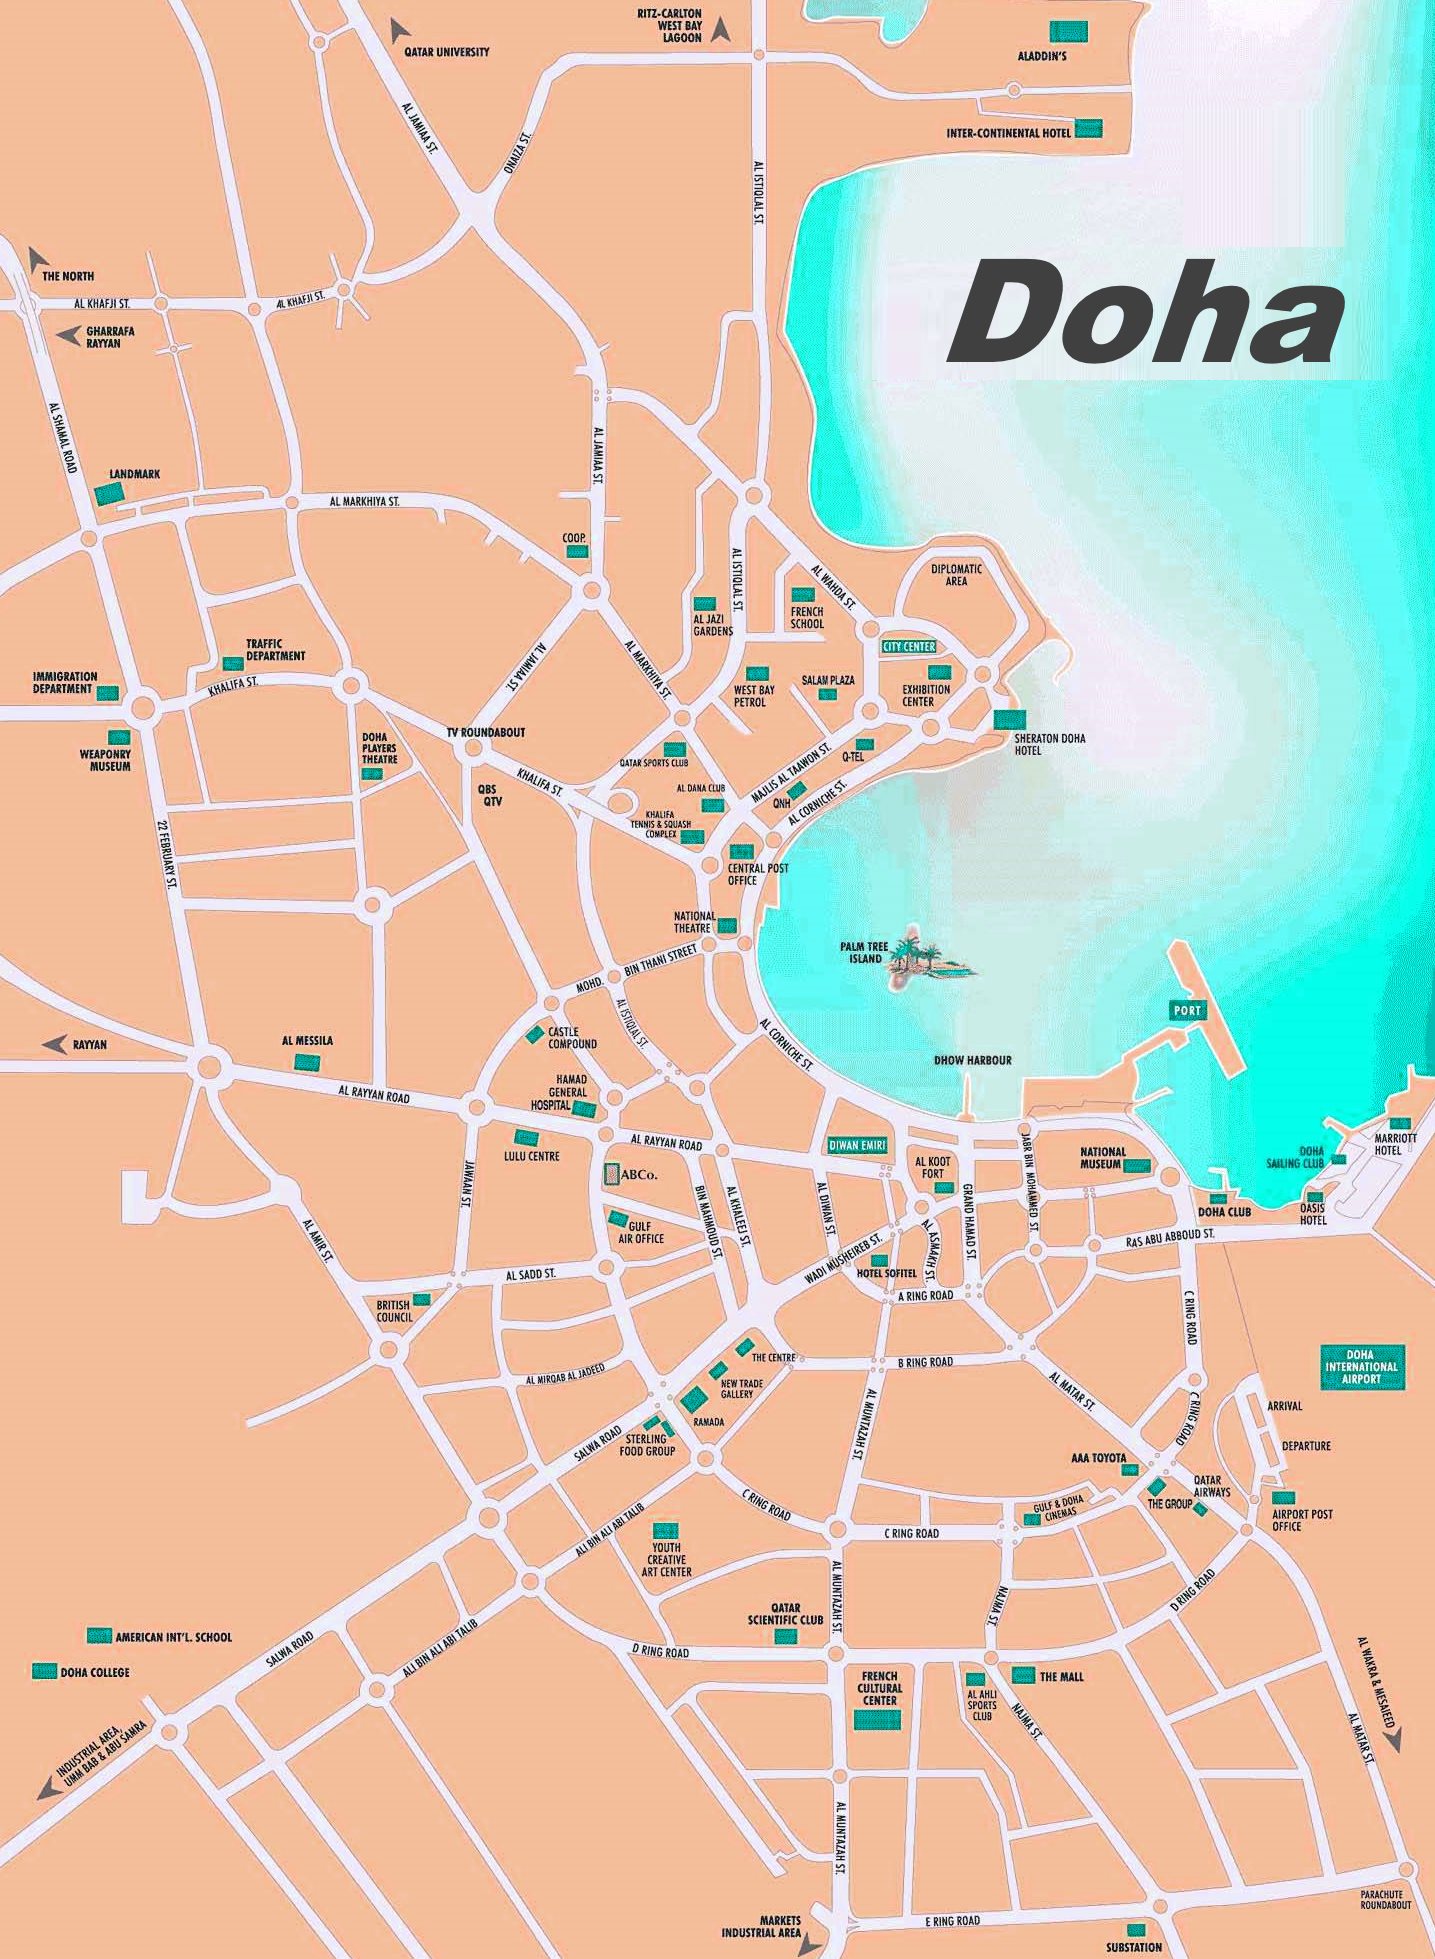 major tourist attractions in qatar map